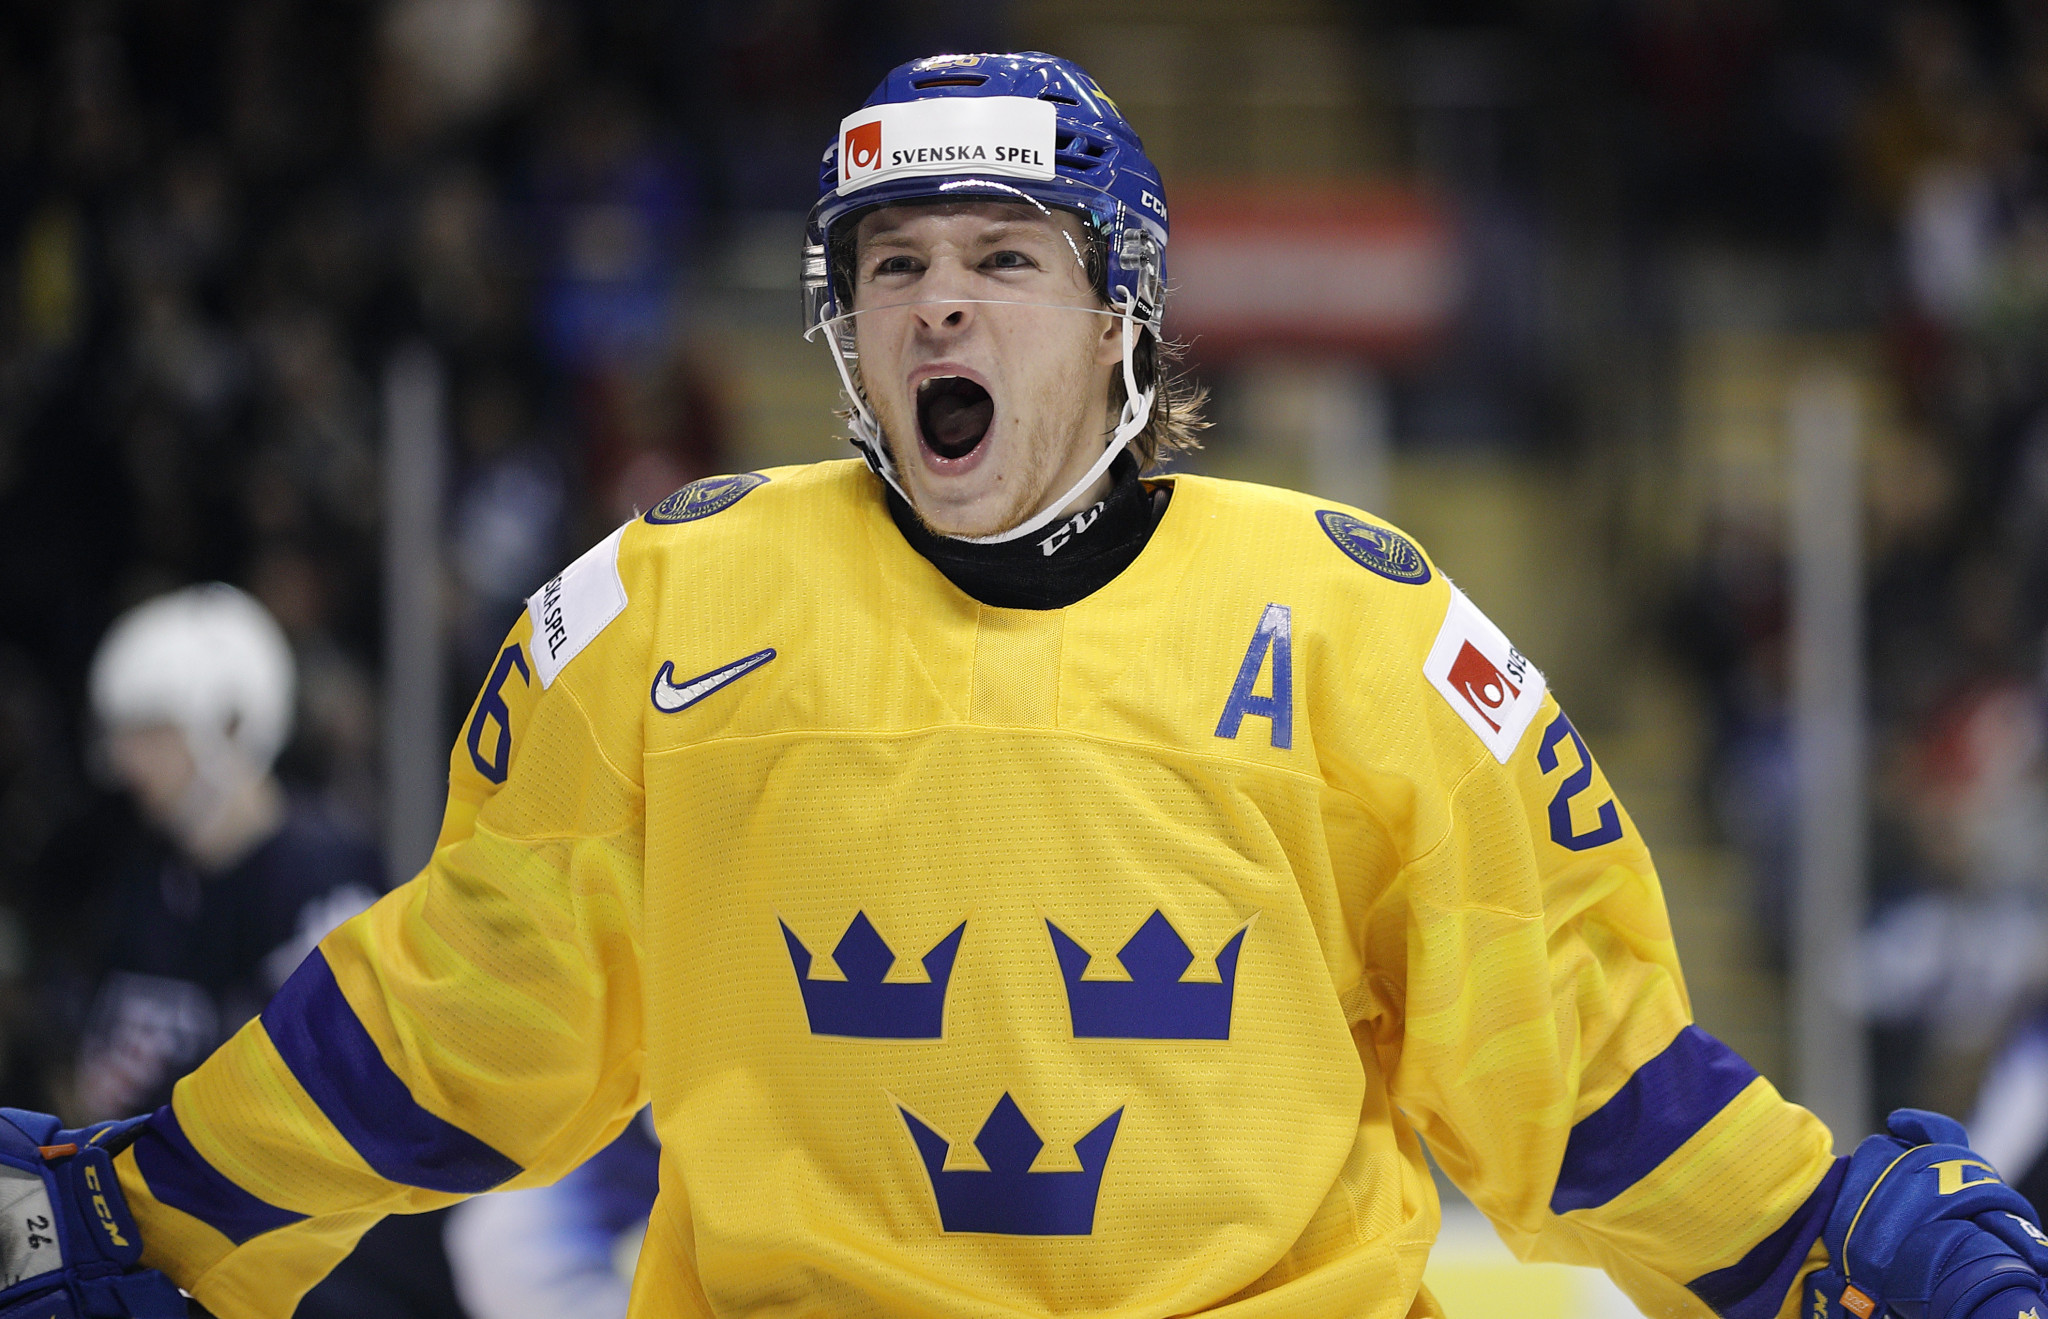 Rickard Hugg celebrates scoring for Sweden against the United States in the IIHF World Junior Championships in Vancouver in a thrilling match the Swedes eventually won 5-4 after squandering a four-goal lead ©Getty Images